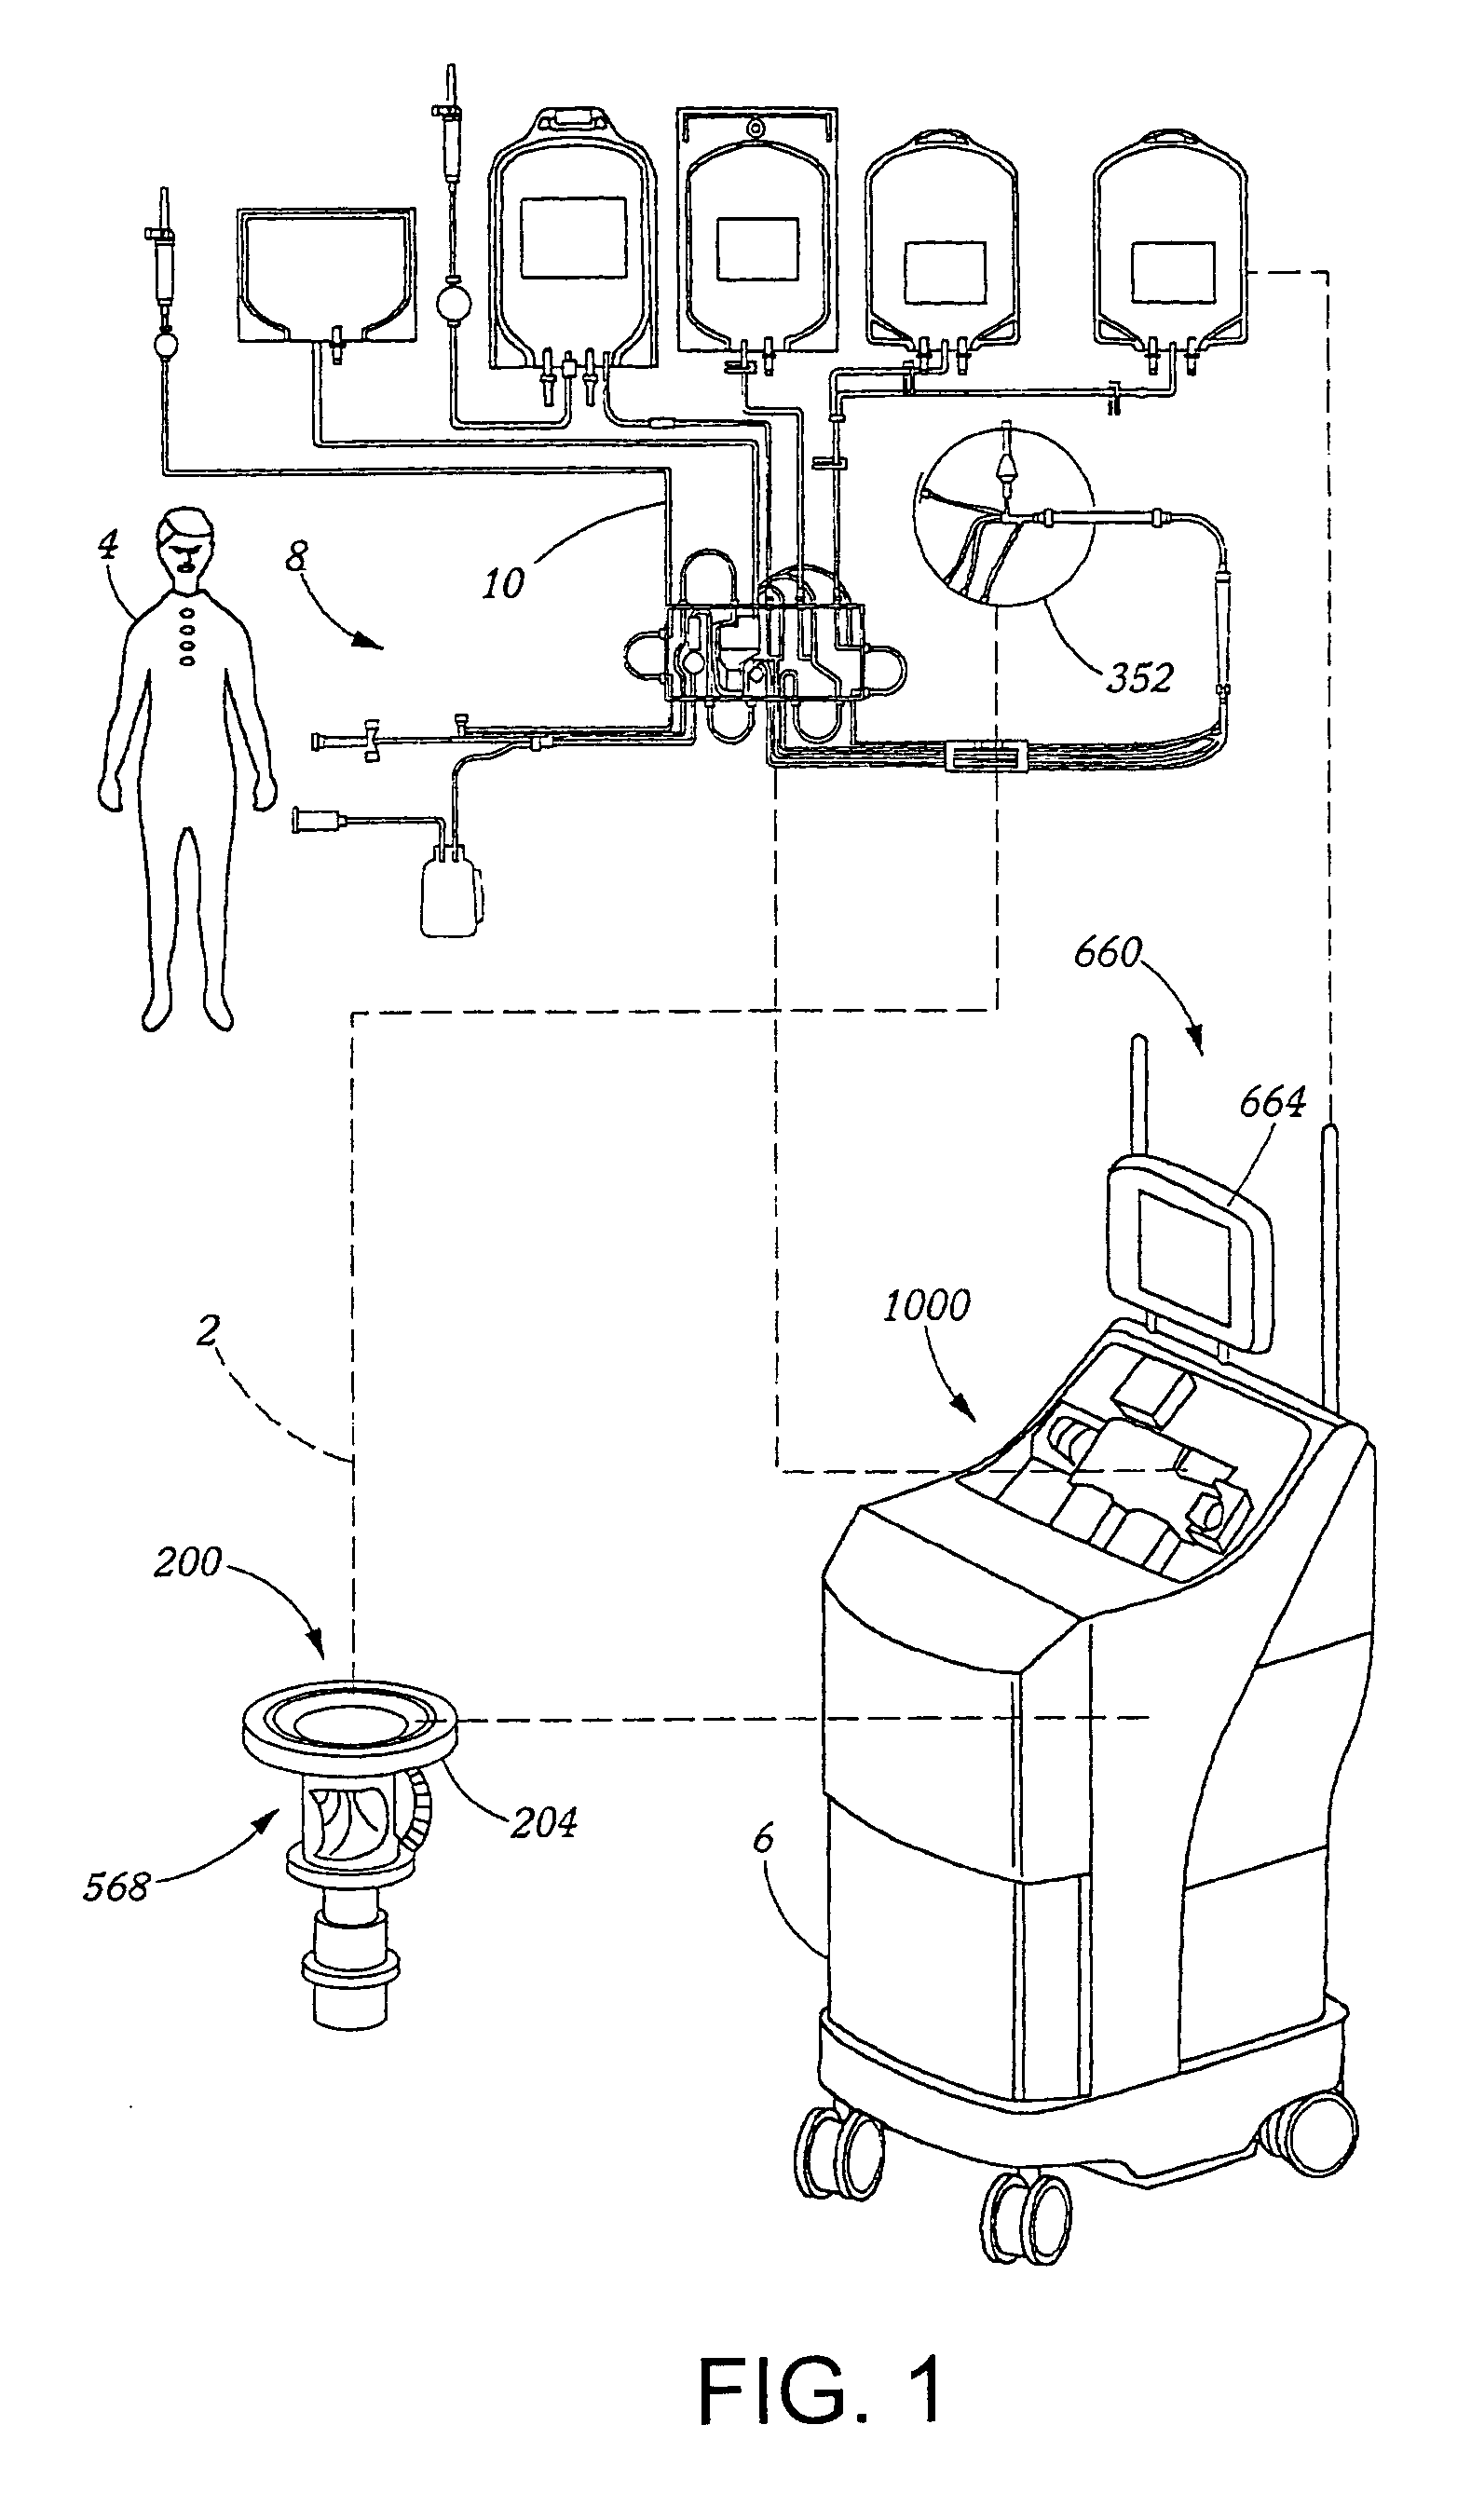 Extracorporeal blood processing methods and apparatus